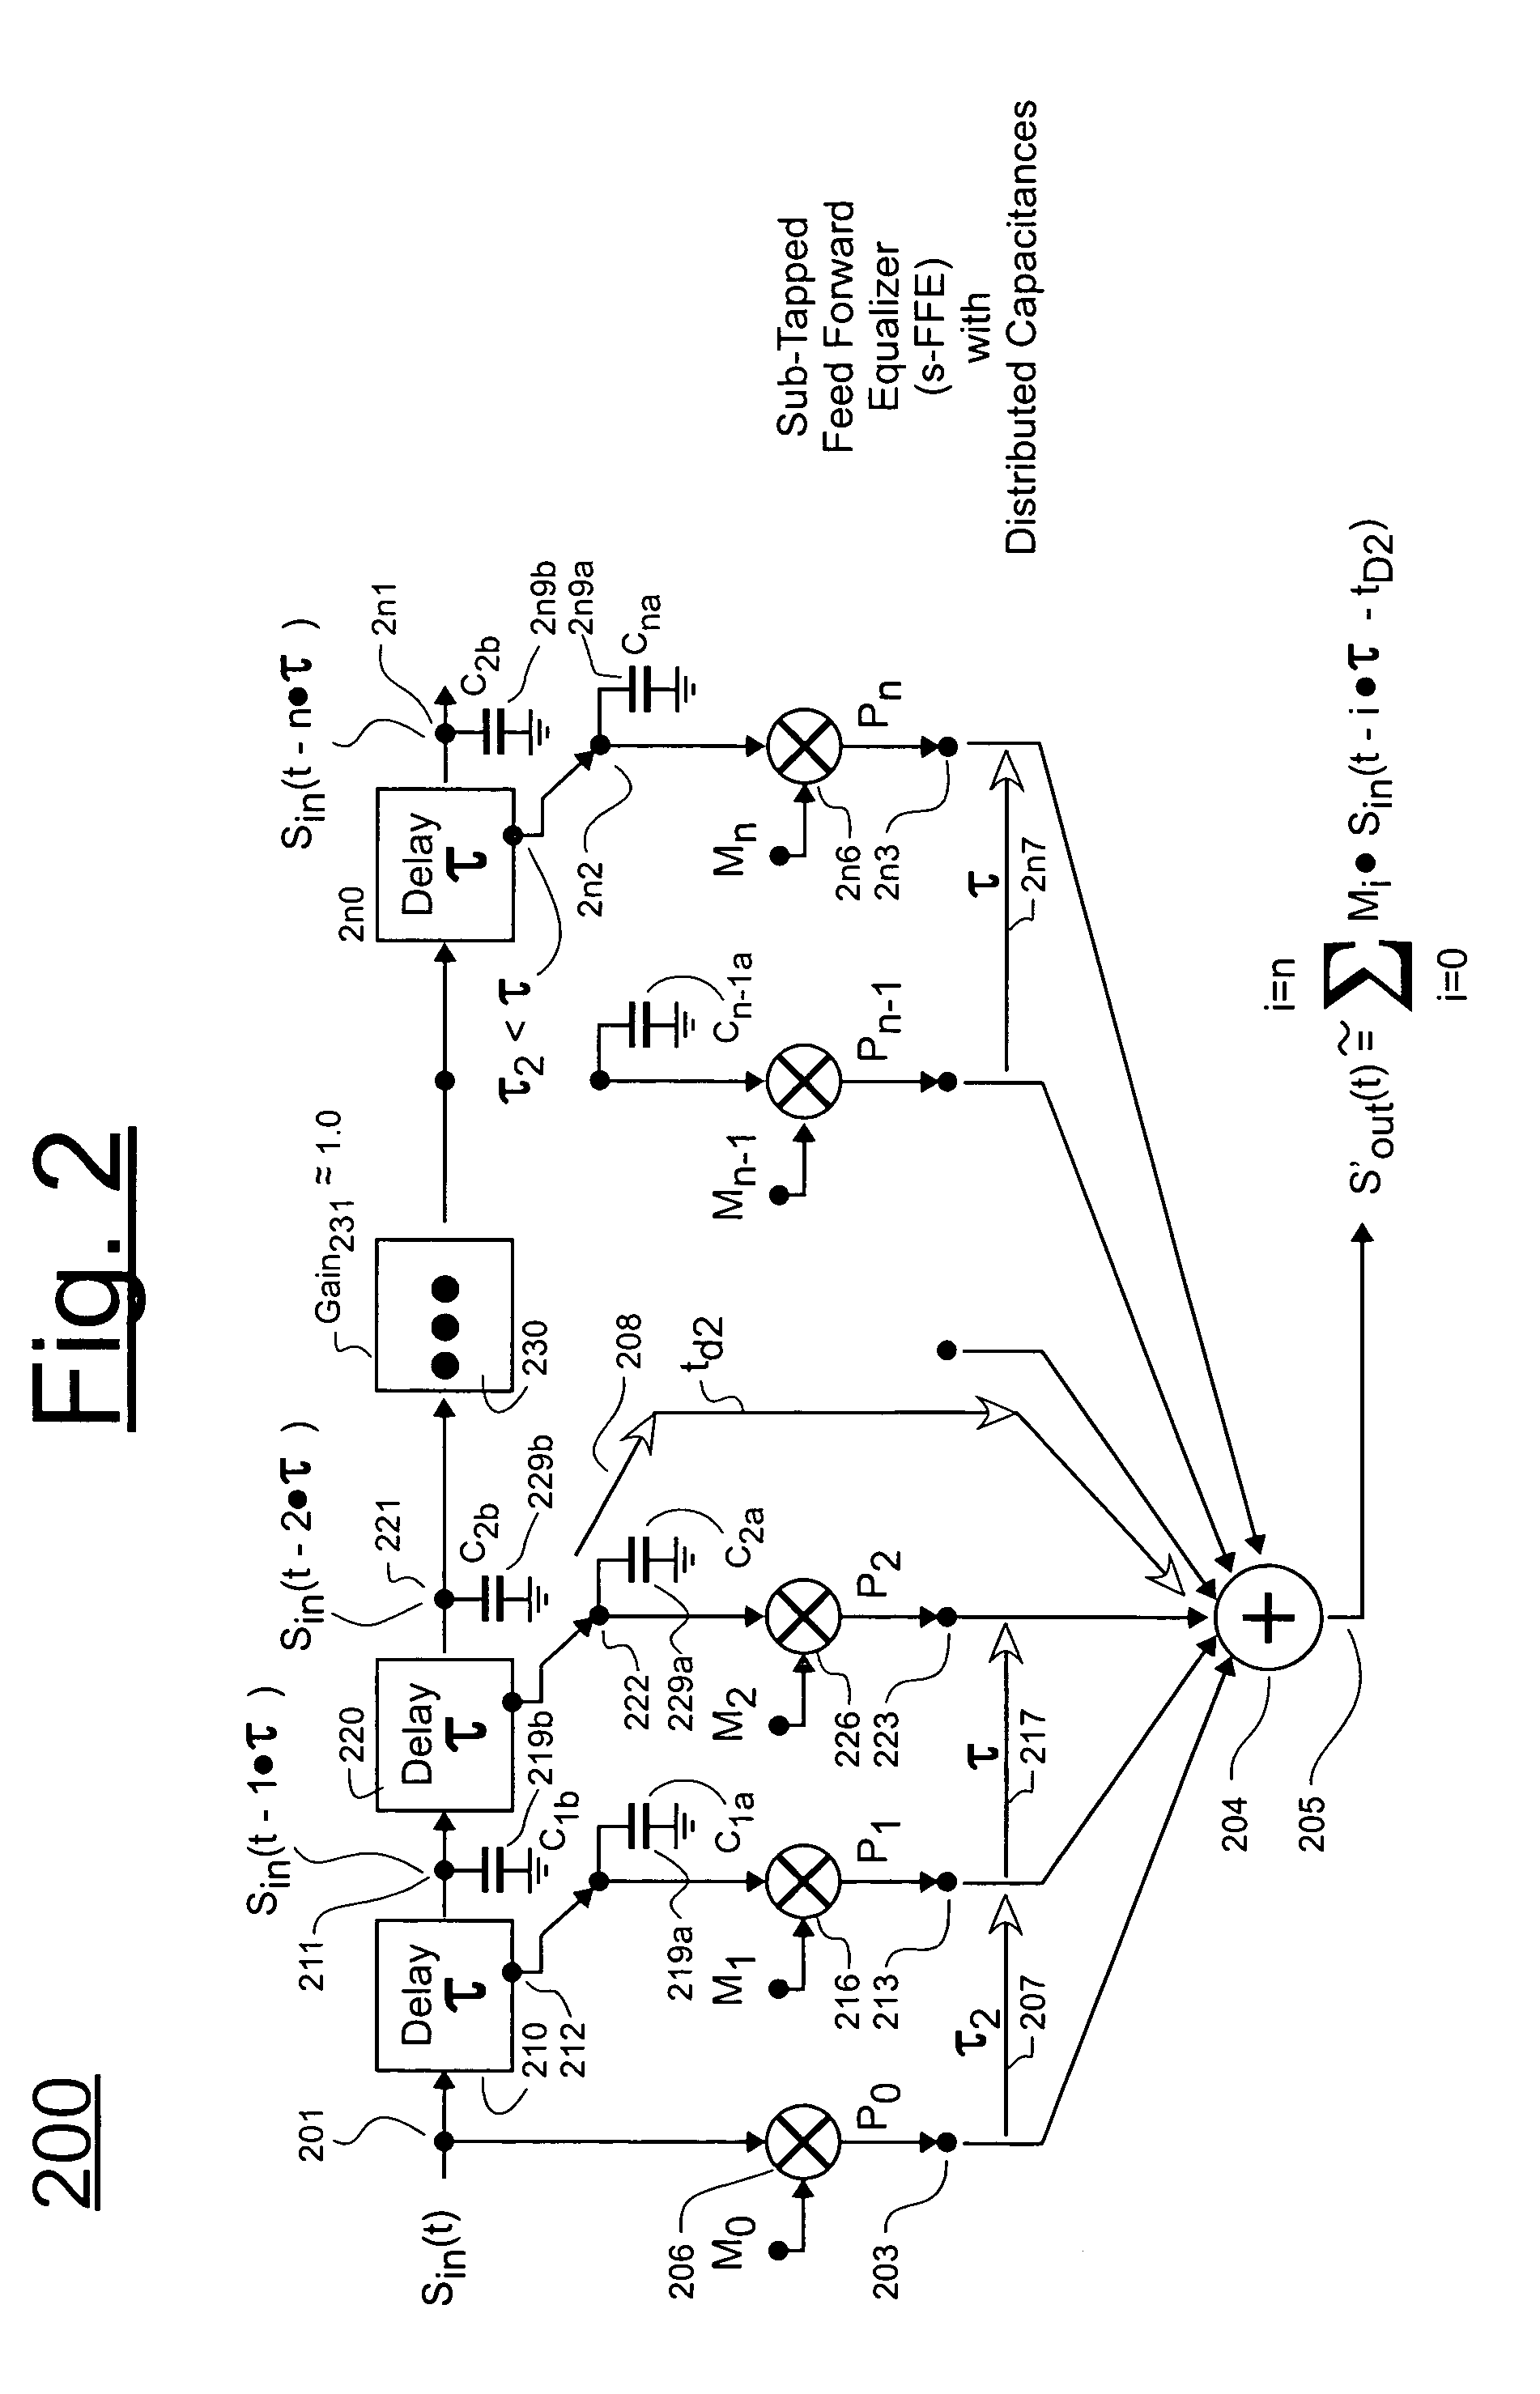 Analog delay chain having more uniformly distributed capacitive loads and analog delay cell for use in chain